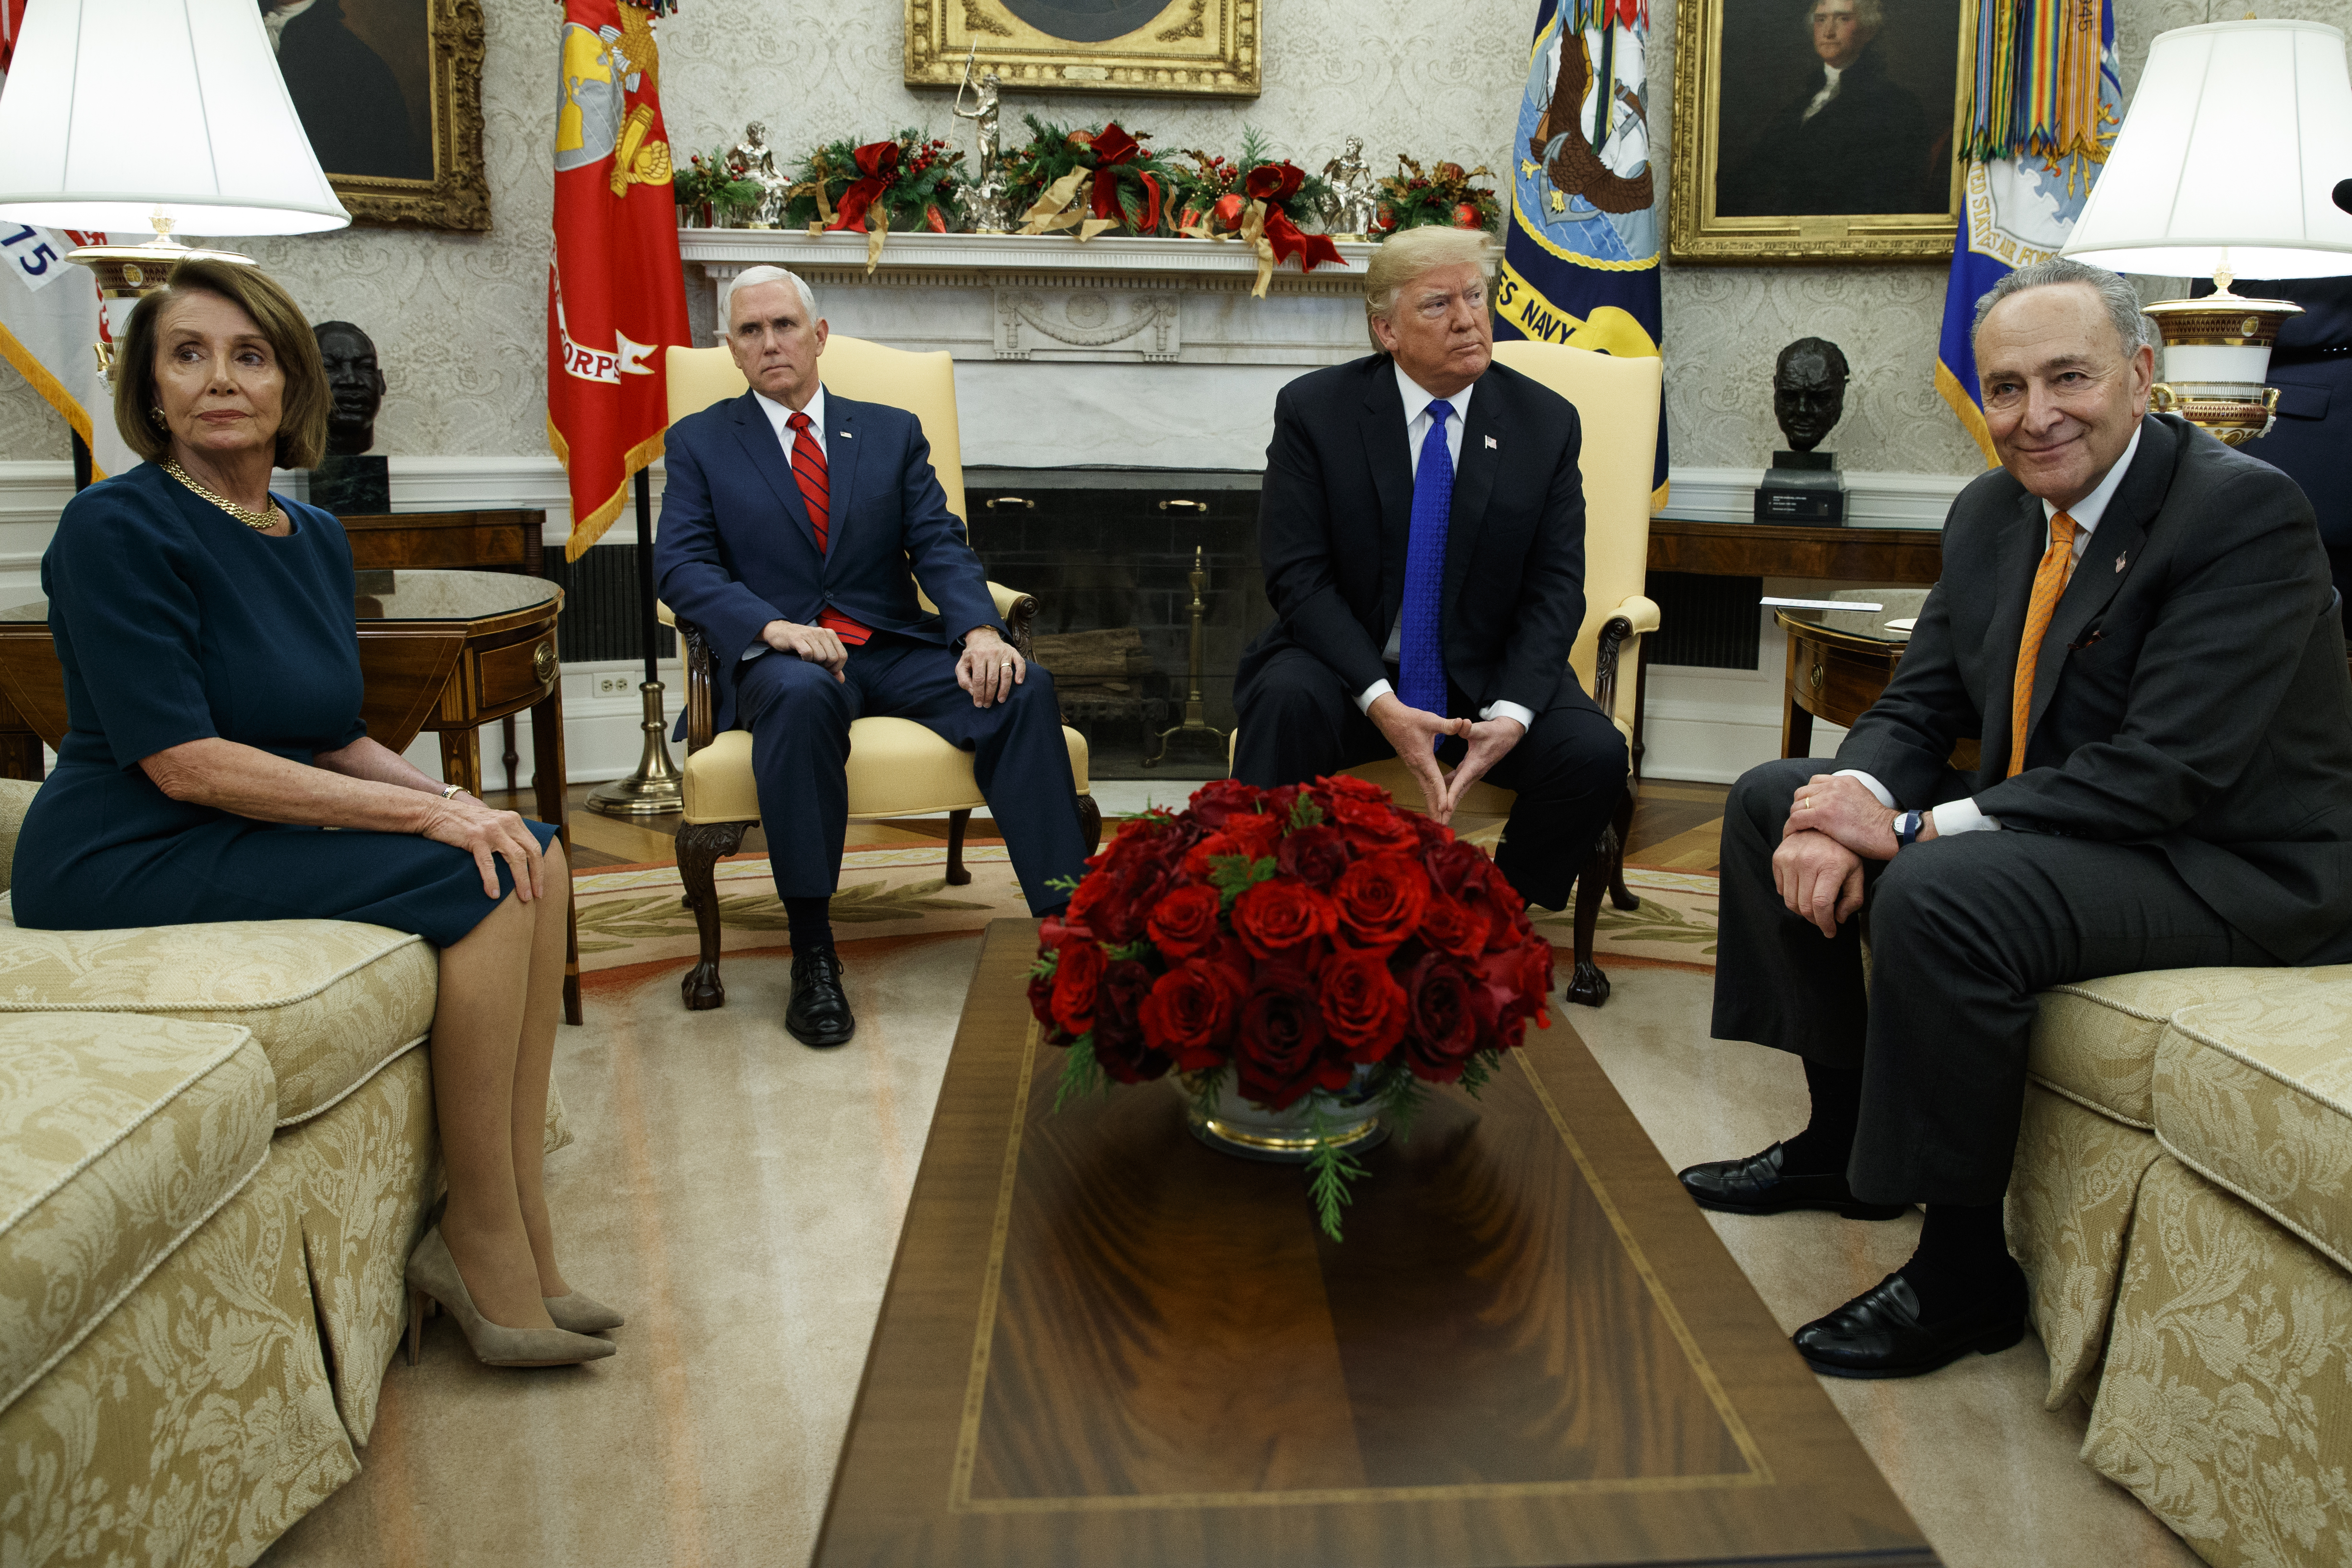 House Minority Leader Rep. Nancy Pelosi, D-Calif., Vice President Mike Pence, President Donald Trump, and Senate Minority Leader Chuck Schumer, D-N.Y., wait as media leave a meeting in the Oval Office of the White House